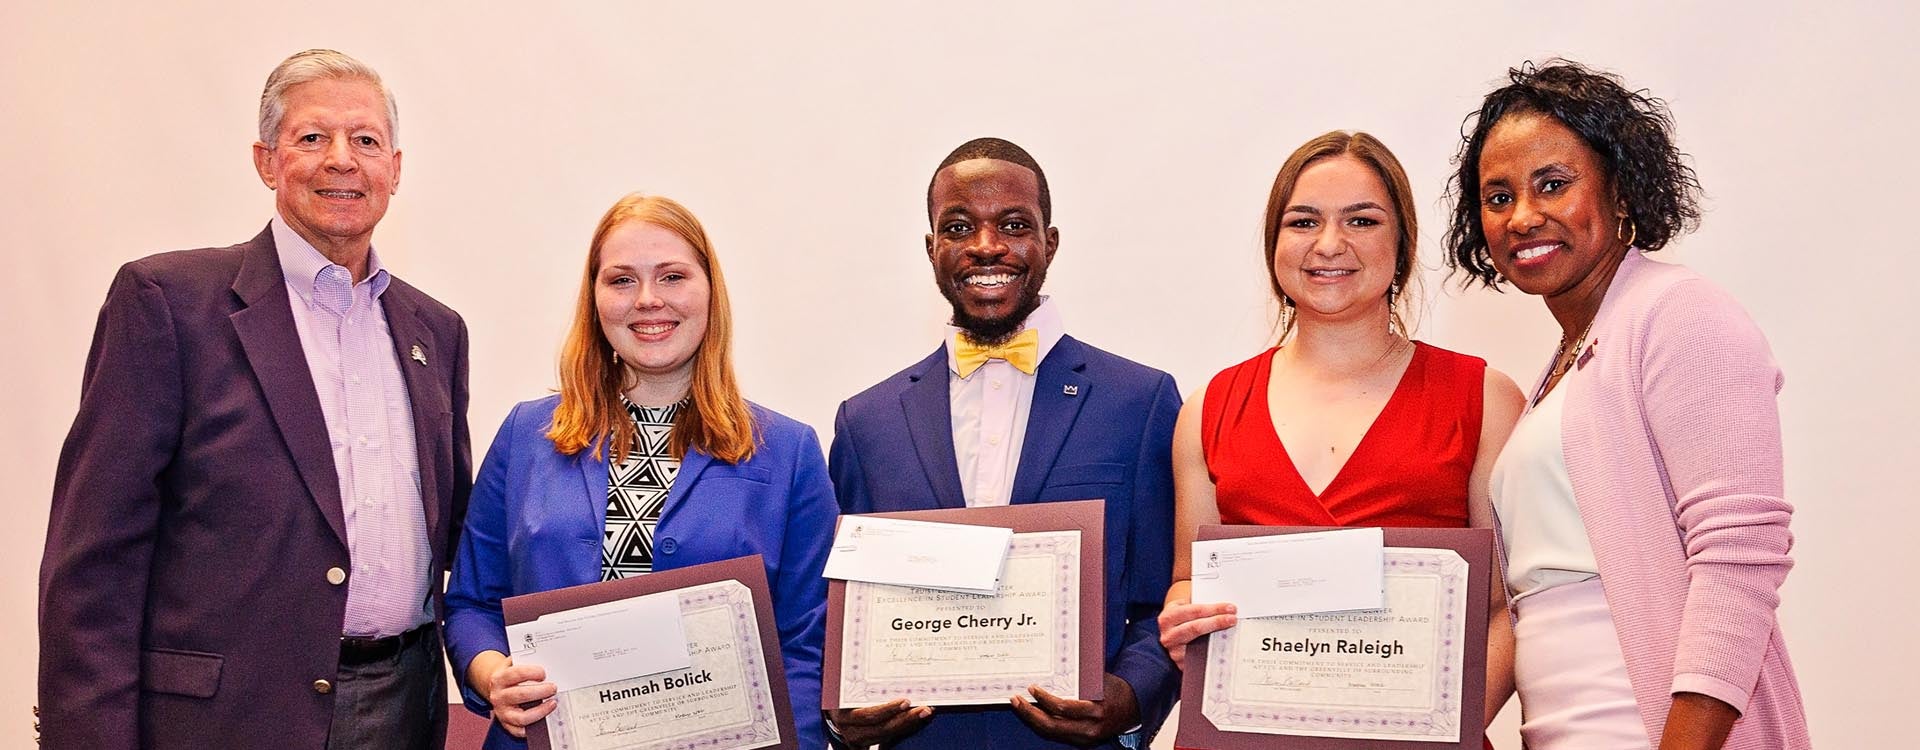 Former Chancellor Steve Ballard, left, and Dr. Virginia Hardy, vice chancellor for student affairs, far right, congratulate Hannah Bolick, George Cherry Jr. and Shaelyn Raleigh who received Truist Leadership Center Excellence in Student Leadership Awards. 